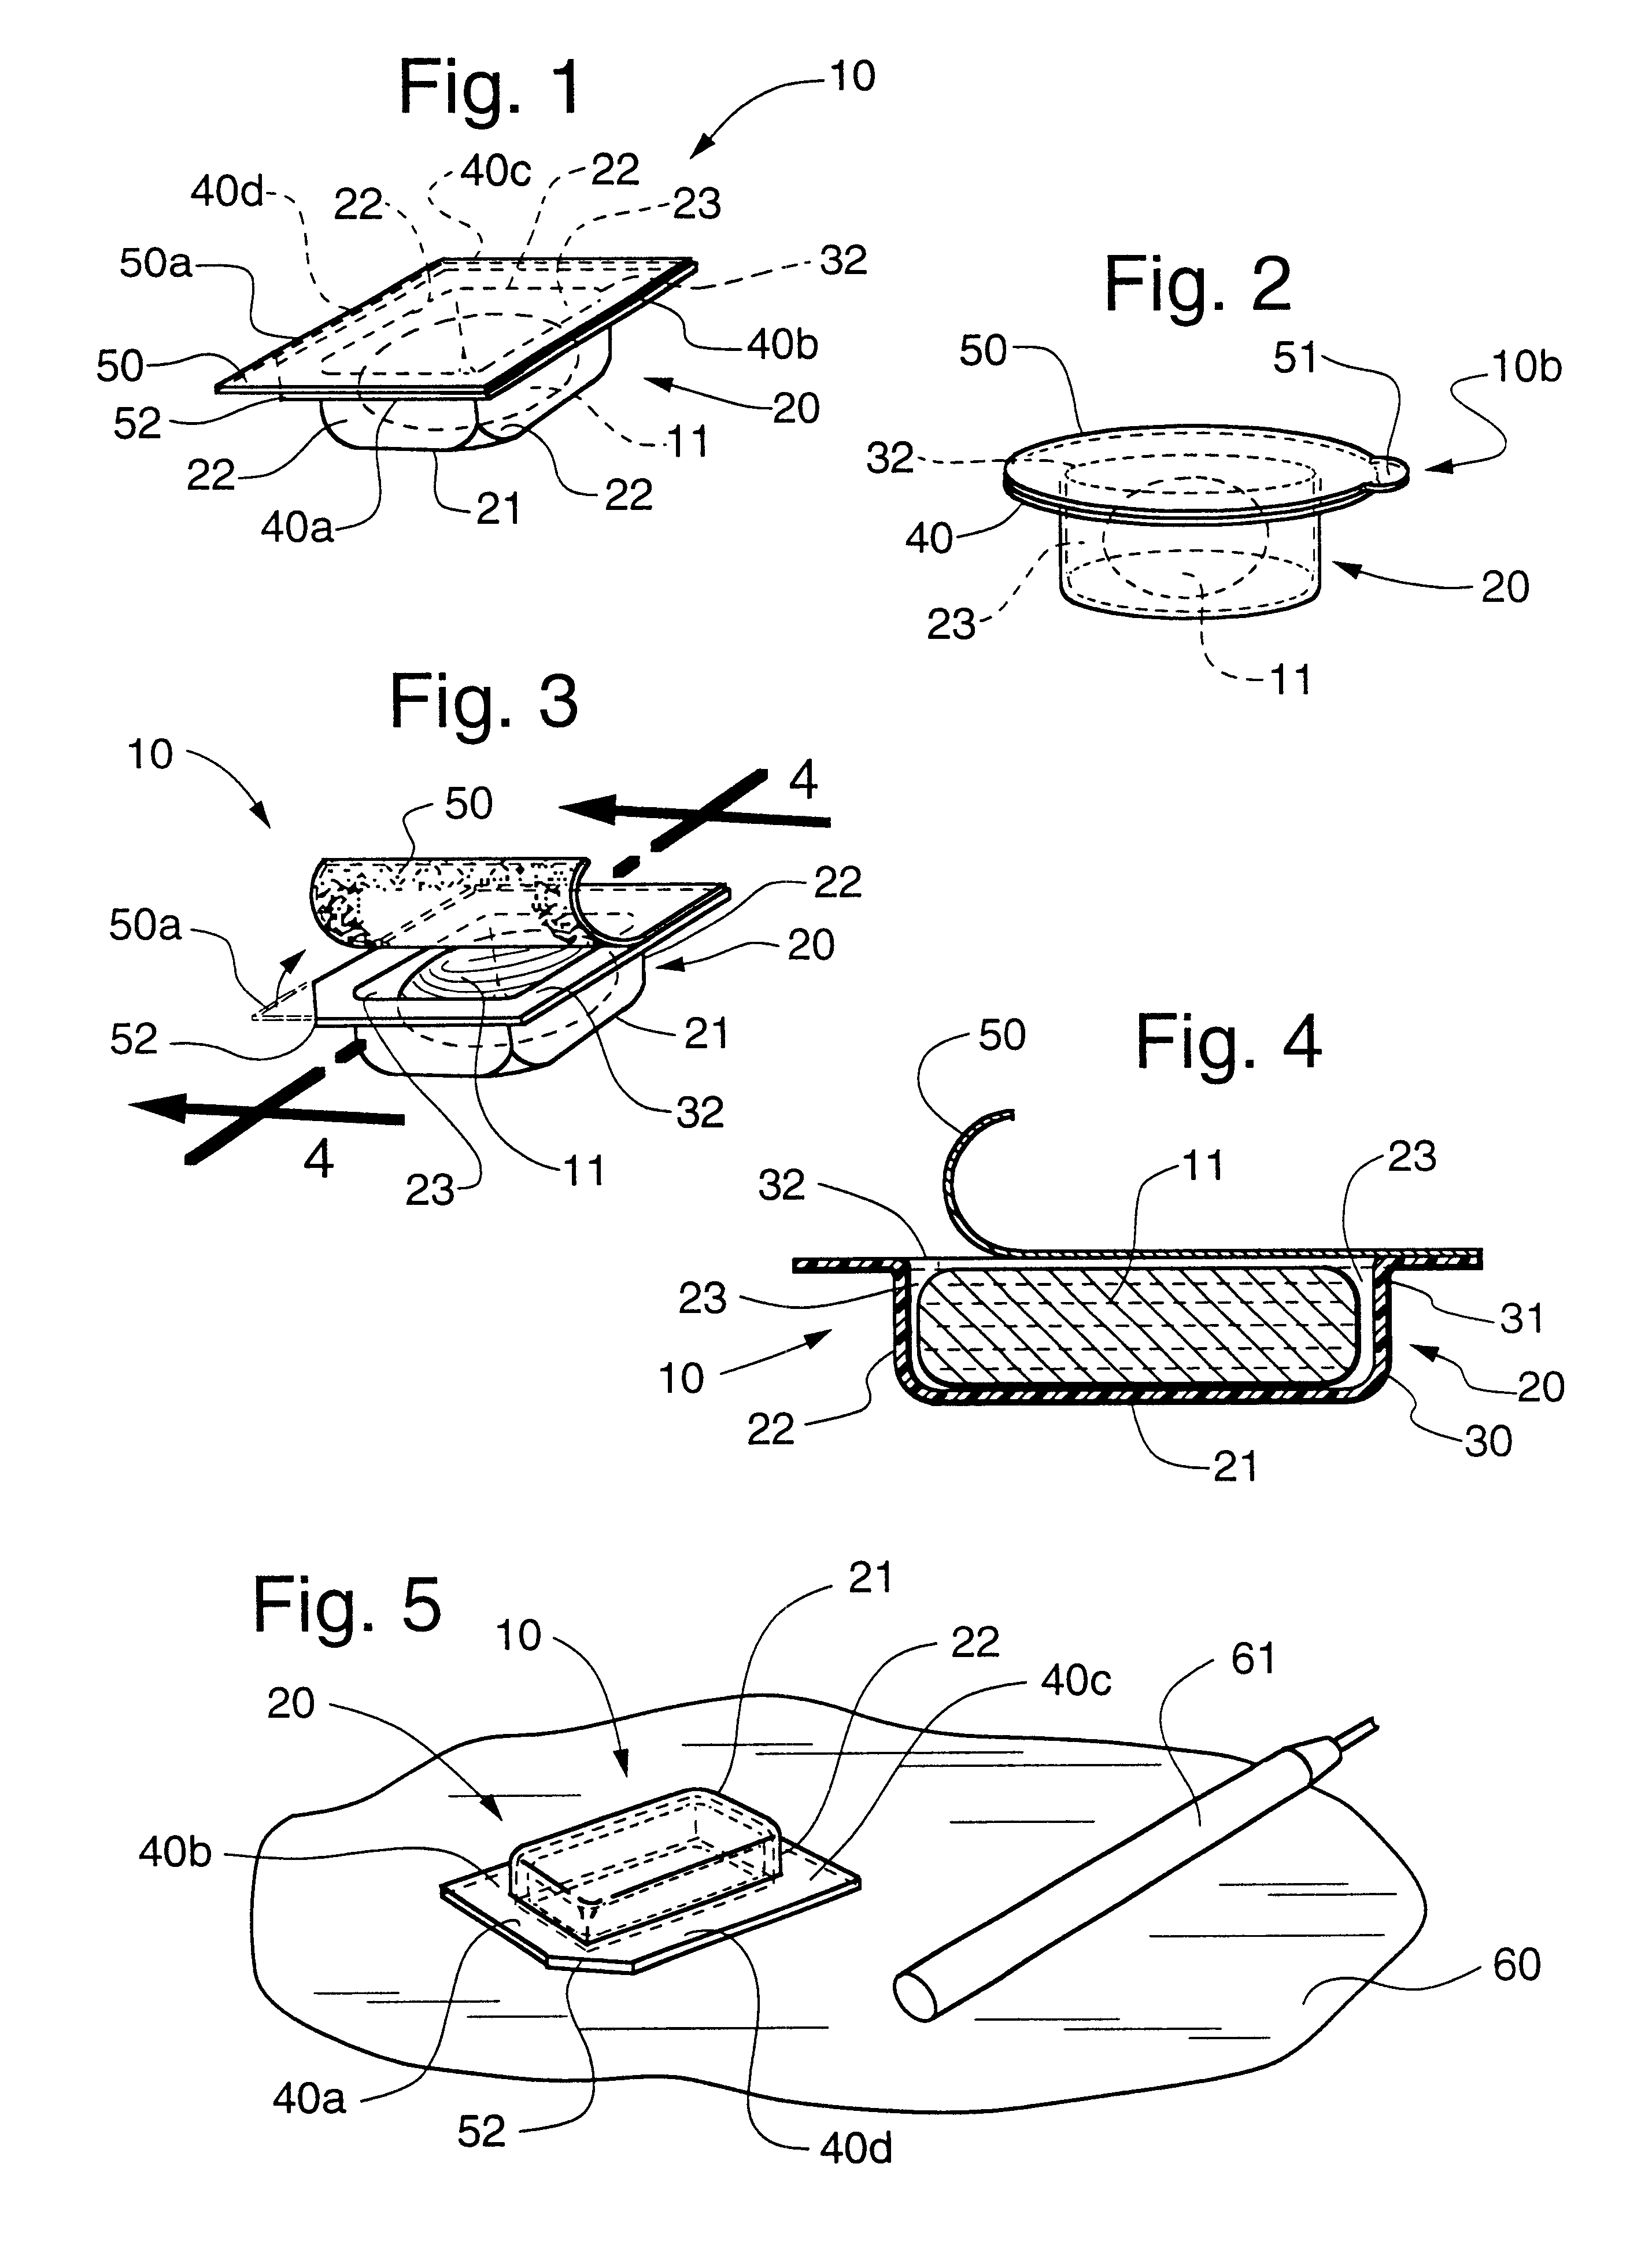 Dental composite restorative material and method of restoring a tooth